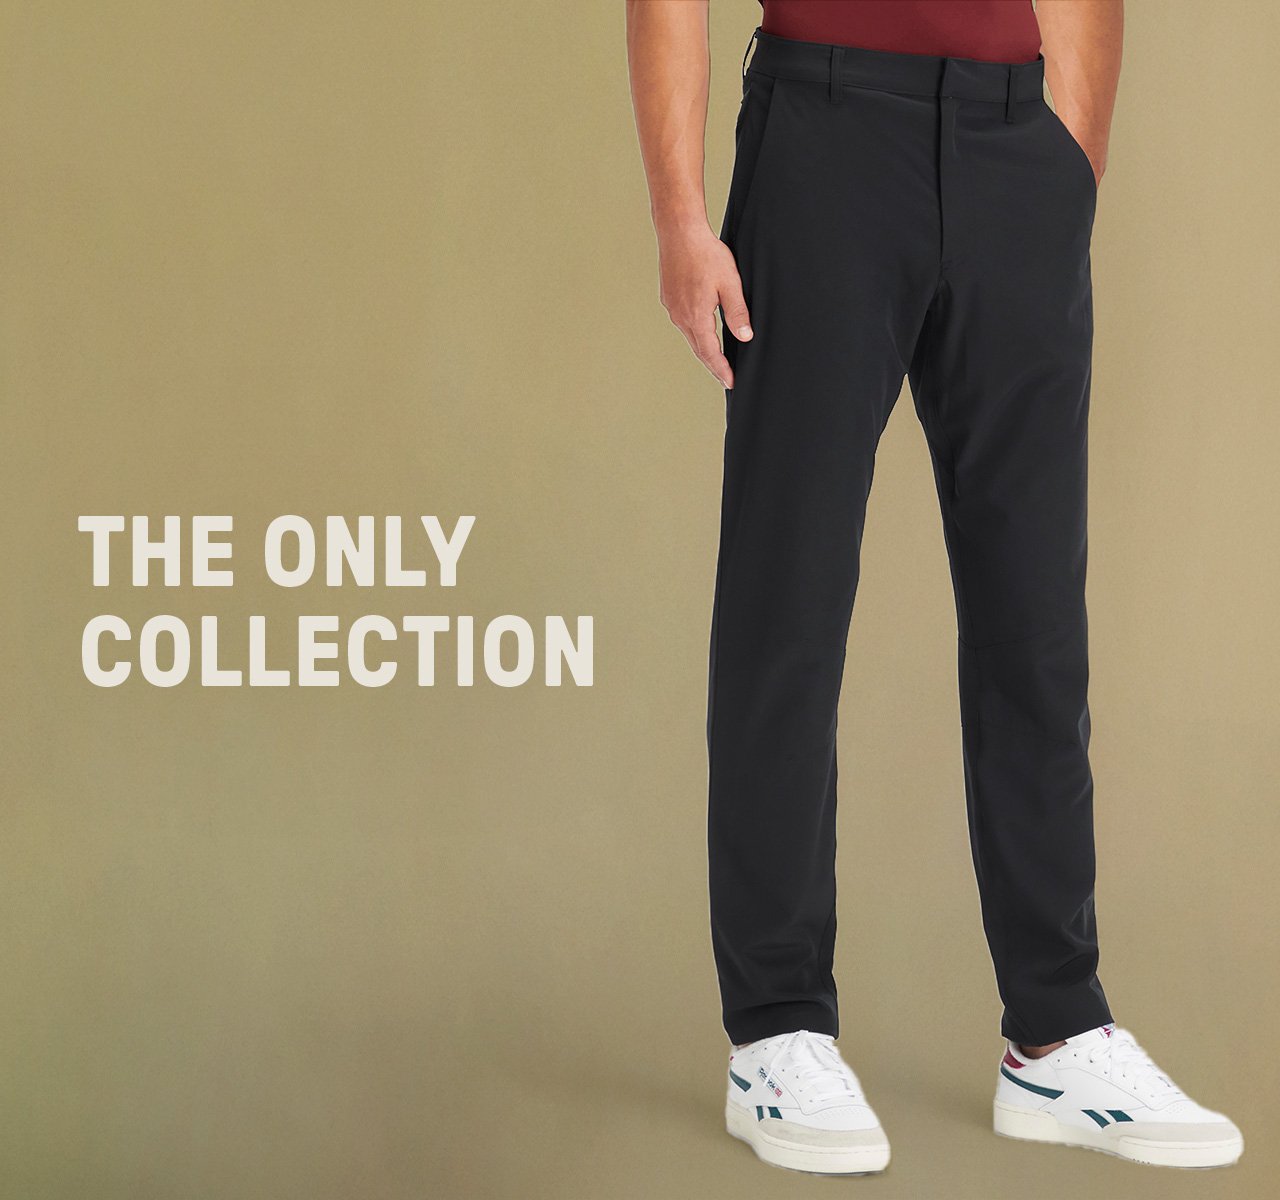 The Only Collection | Fabletics Men